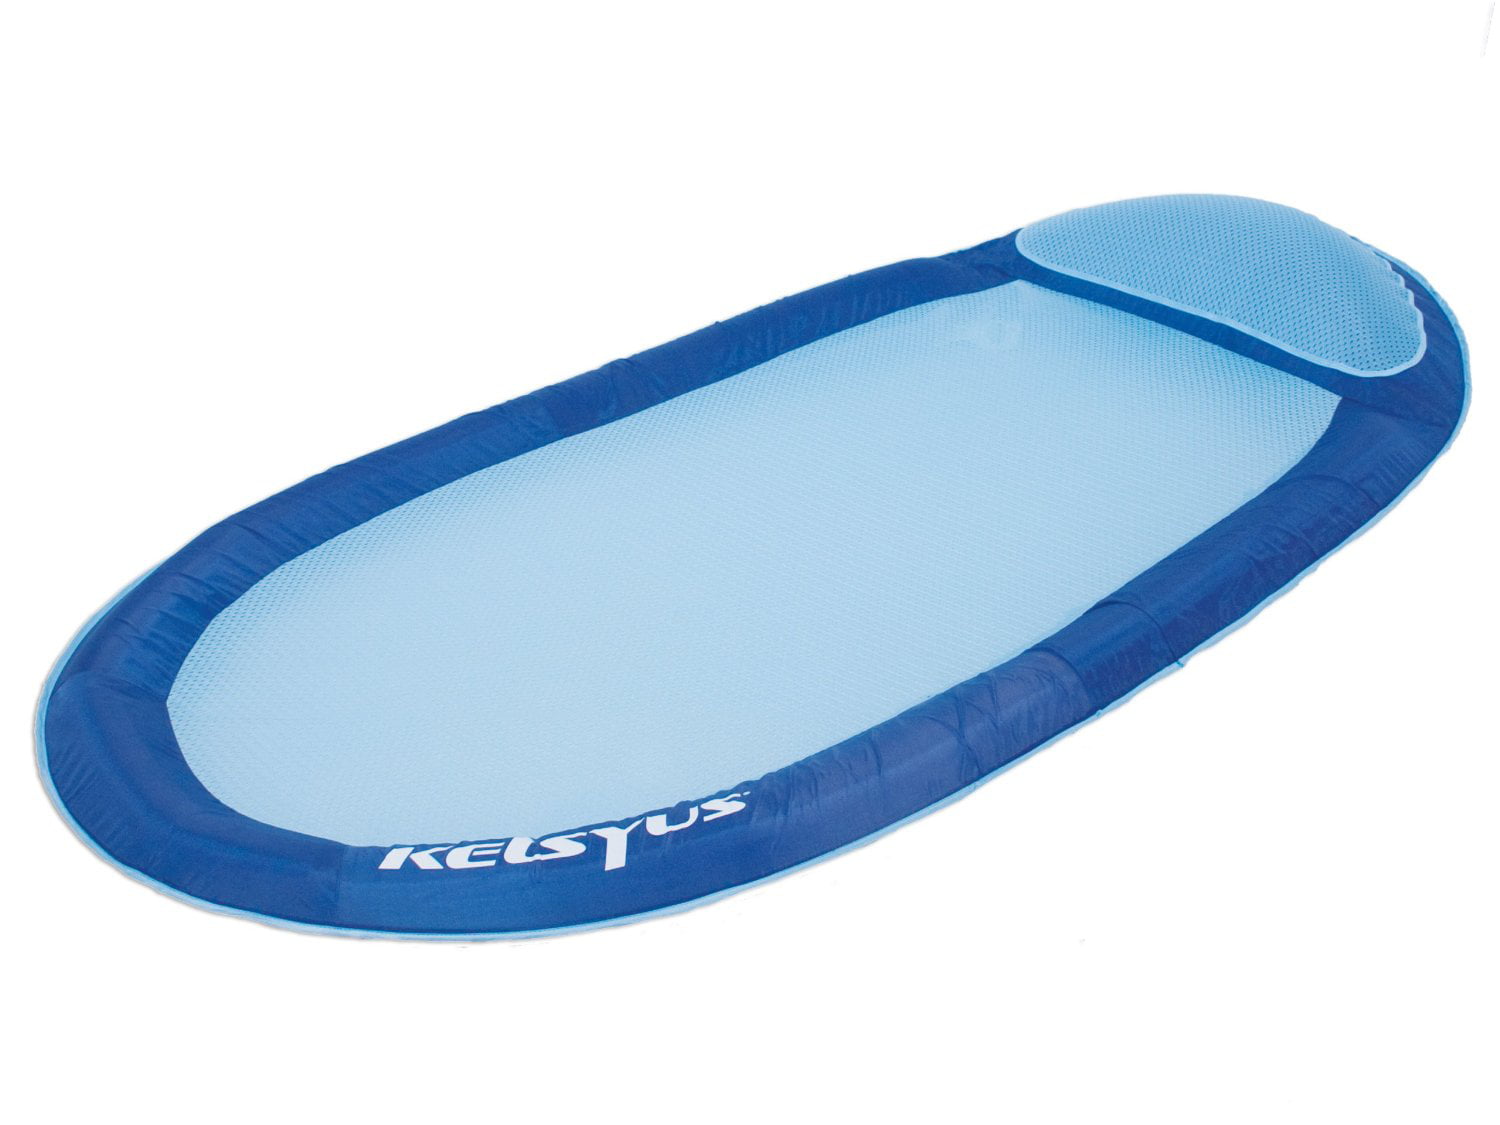 Kelsyus floating Chaise Lounger New